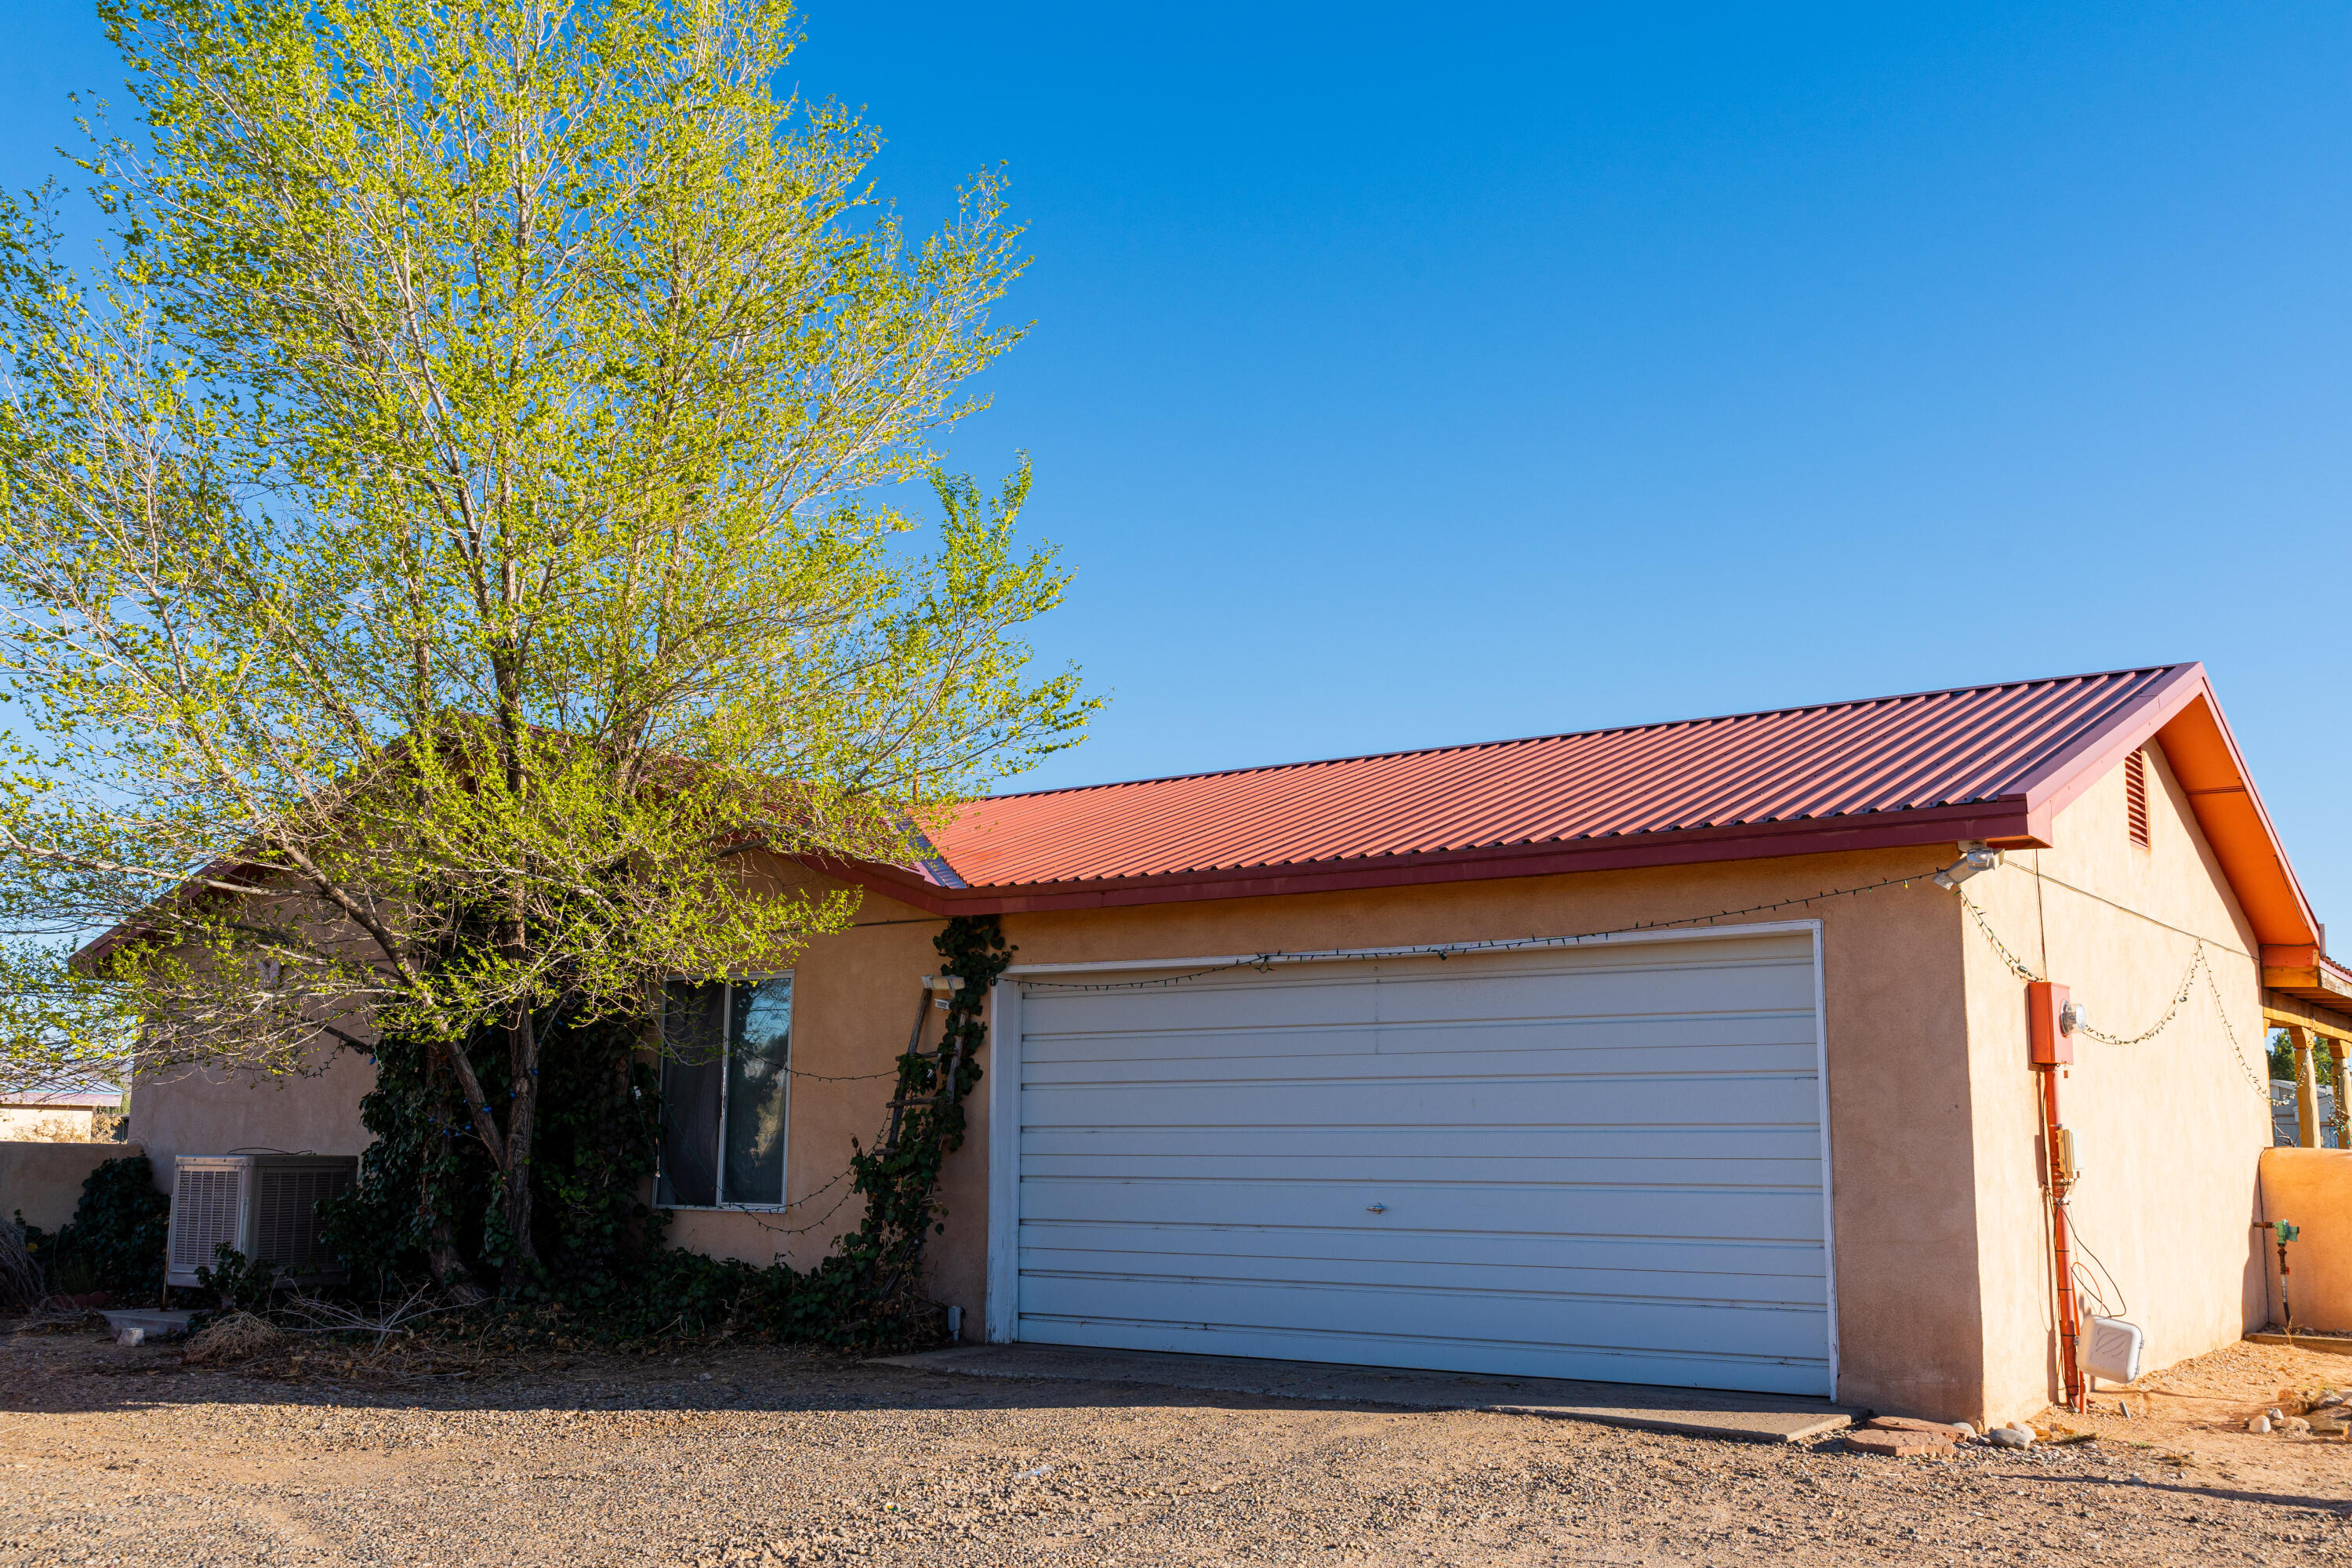 Beautiful home with much potential in a wonderful area of Corrales. So much space for toys, animals and children. Be sure to get a glimpse of the great views of the Sandias. This 3bd/2bh home gives you almost everything.